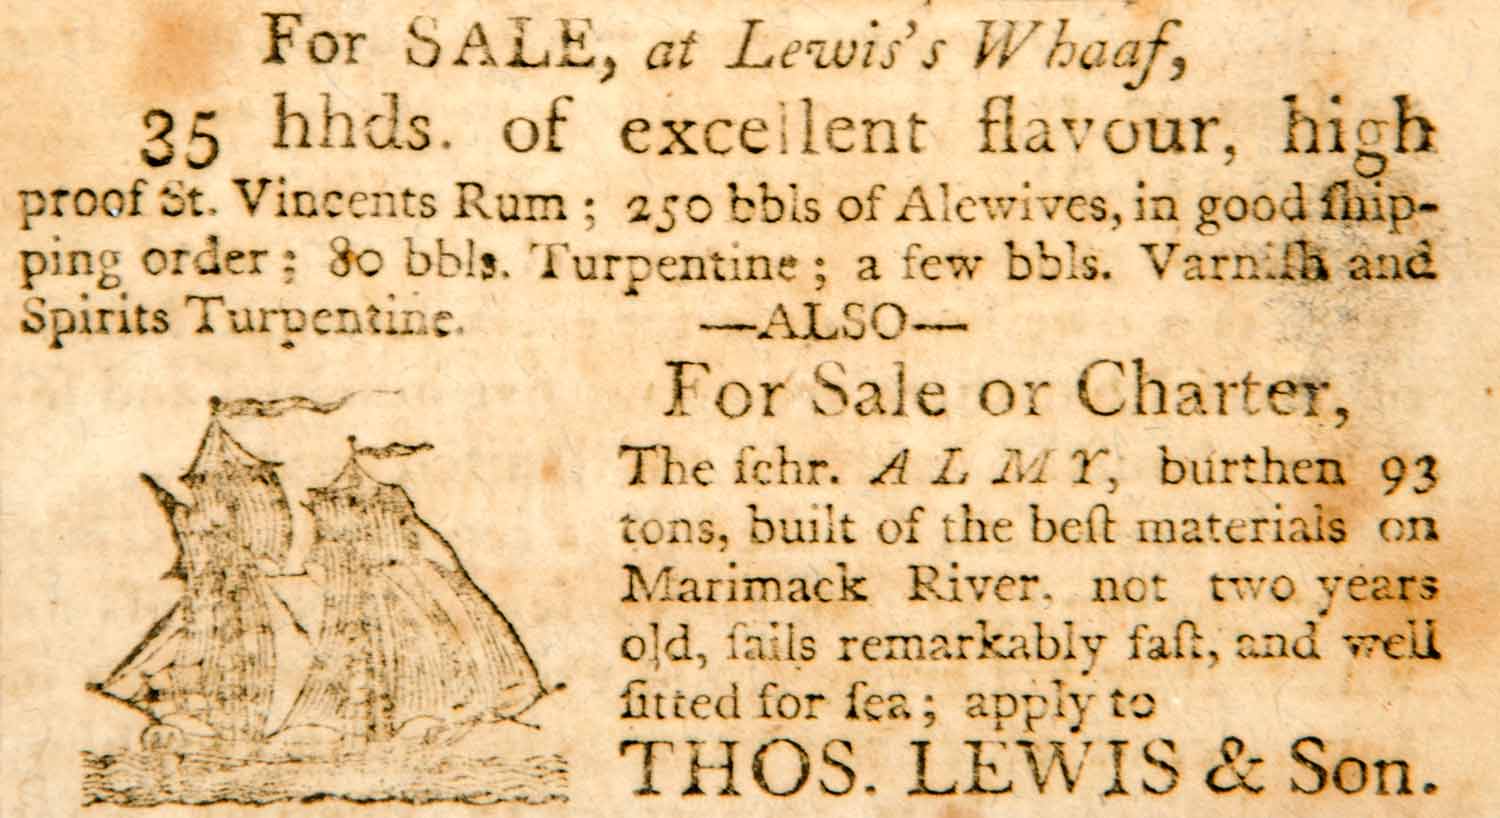 1798 Ad Lewis Wharf St. Vincent's Rum Alewives Turpentine Almy Marimack YJR1